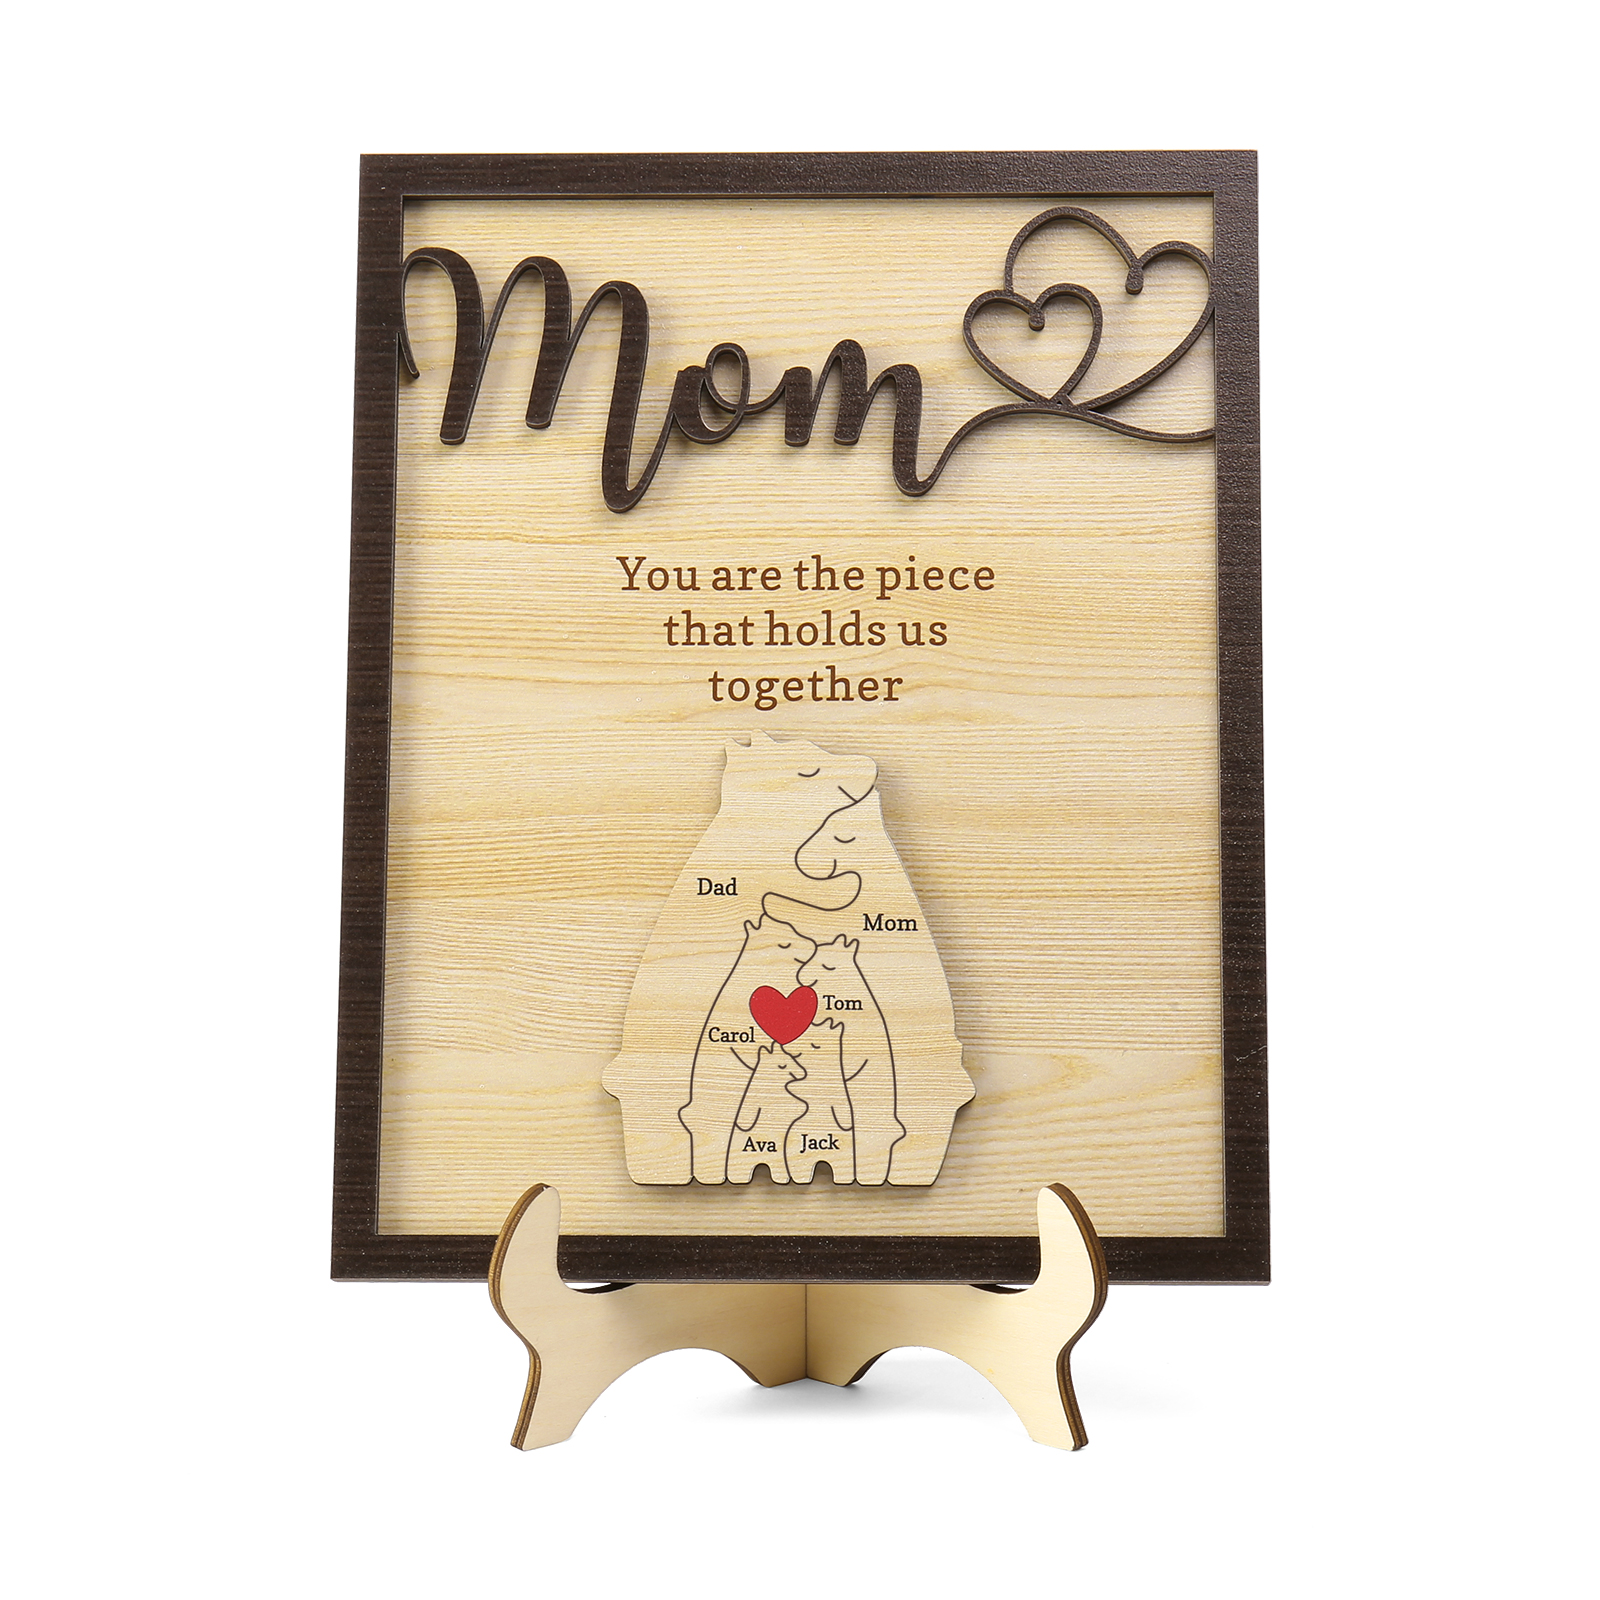 6 Names - Personalized Home Frame Wooden Ornaments Cute Bear Style Customizable 2 Text Ornaments For Mom